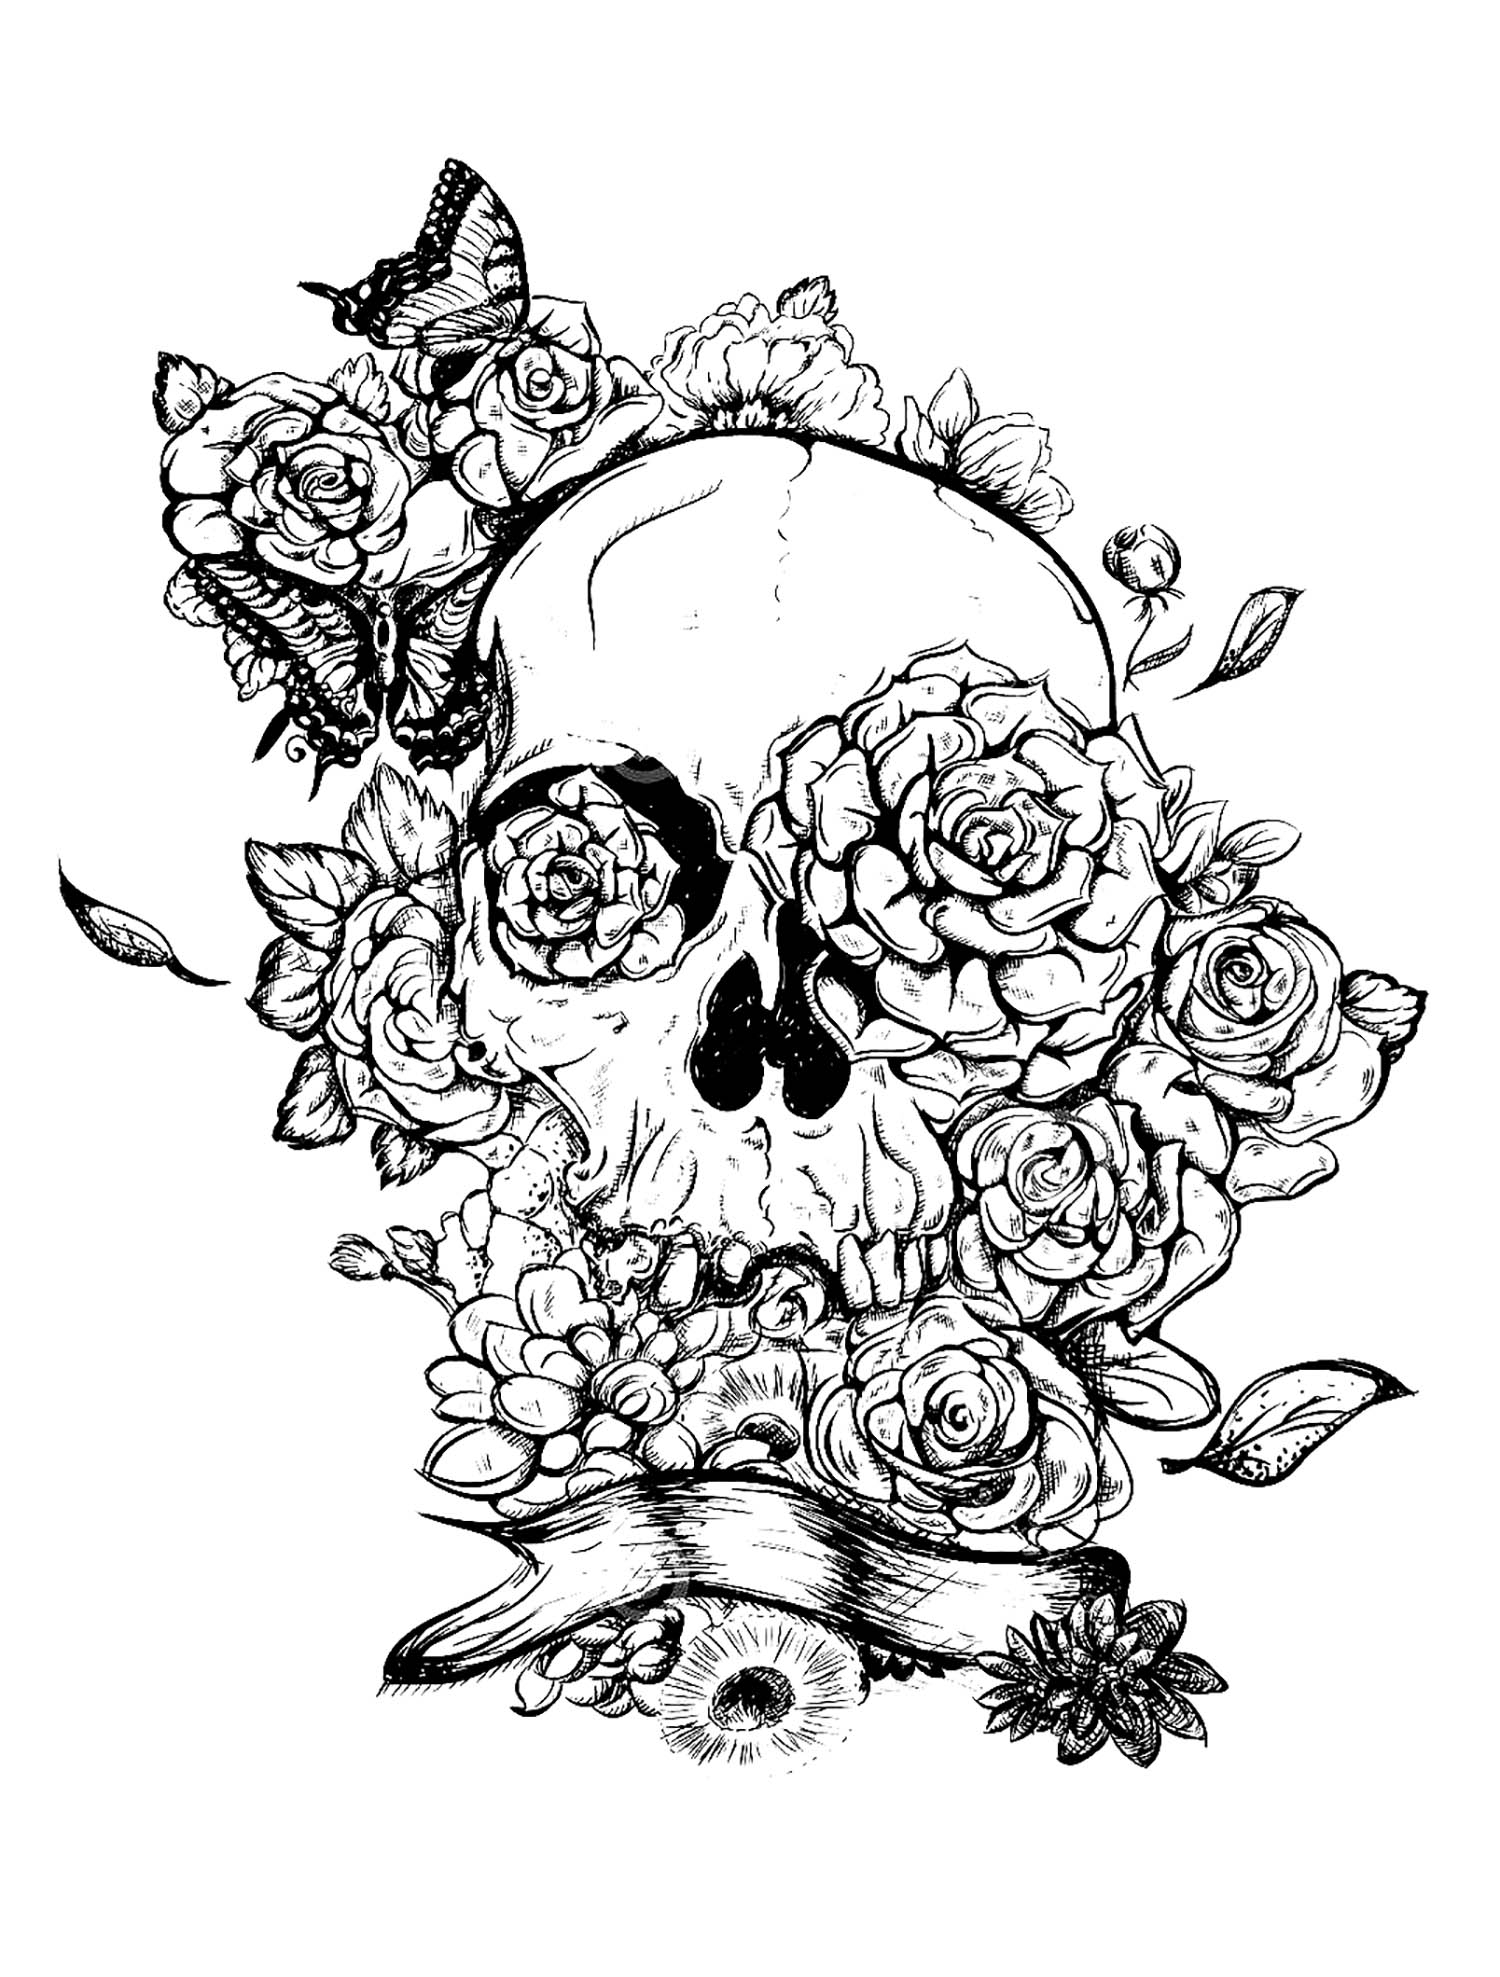 Adult Coloring Pages Skull And Roses Tattoo Tattoos Adult Coloring Pages